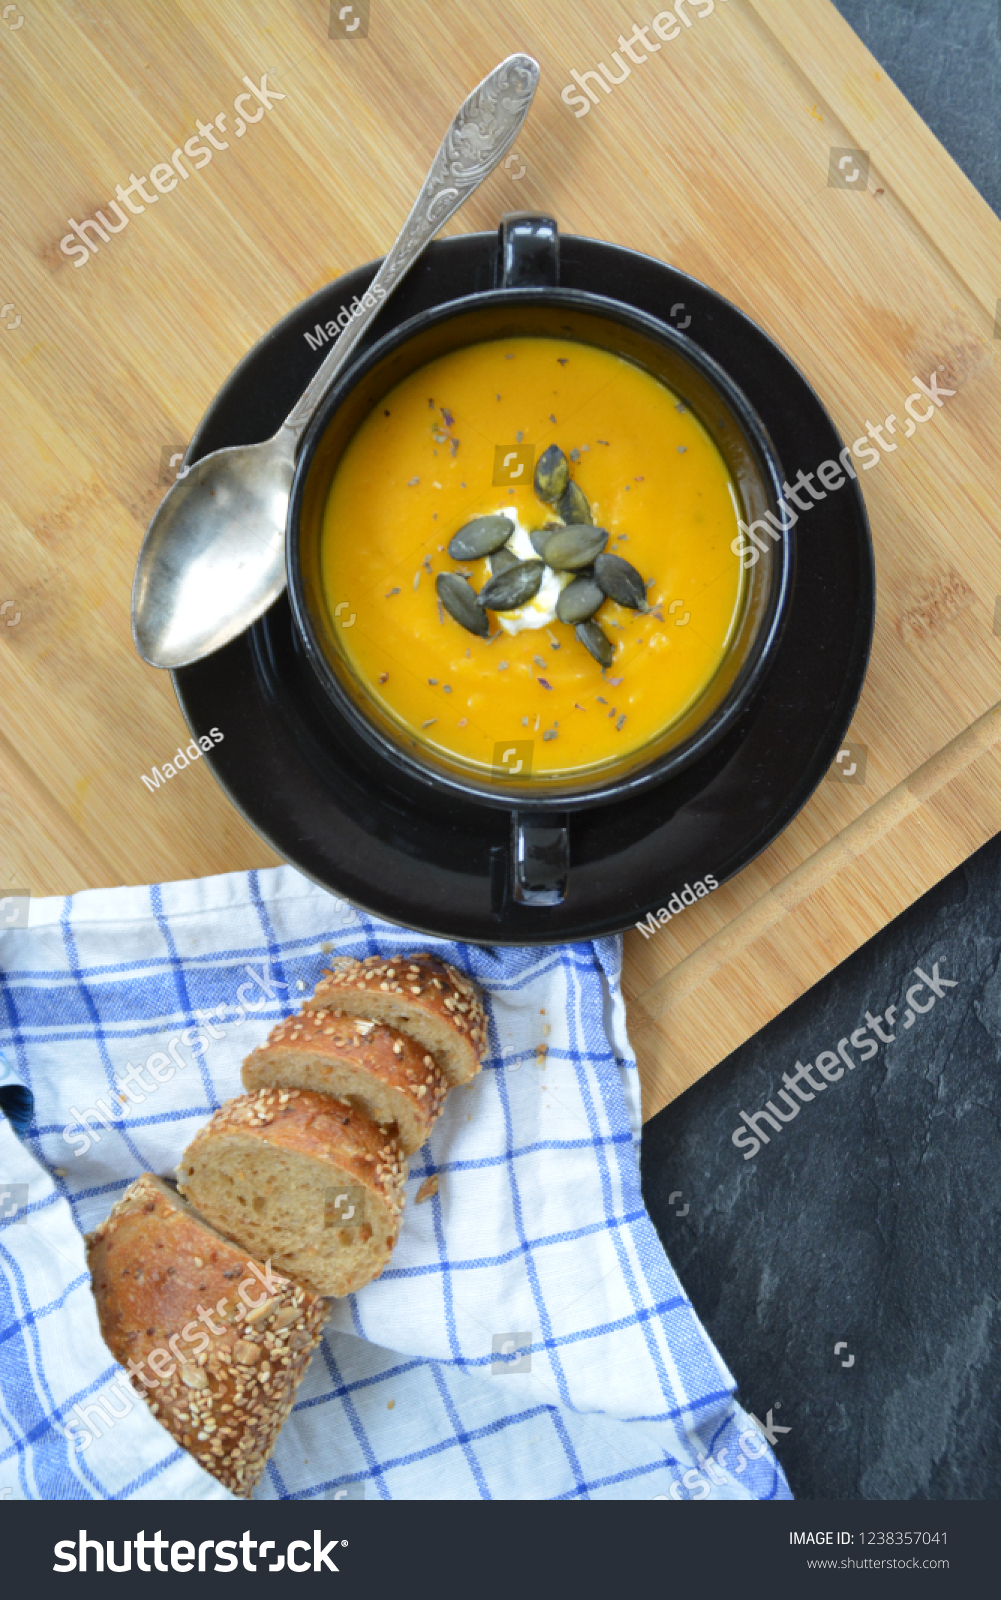 Pumpkin cream soup in a small bowl and on a wooden board on a kitchen surface with a whole pumpkin and sliced ​​bread beside it - autumnal feasting #1238357041